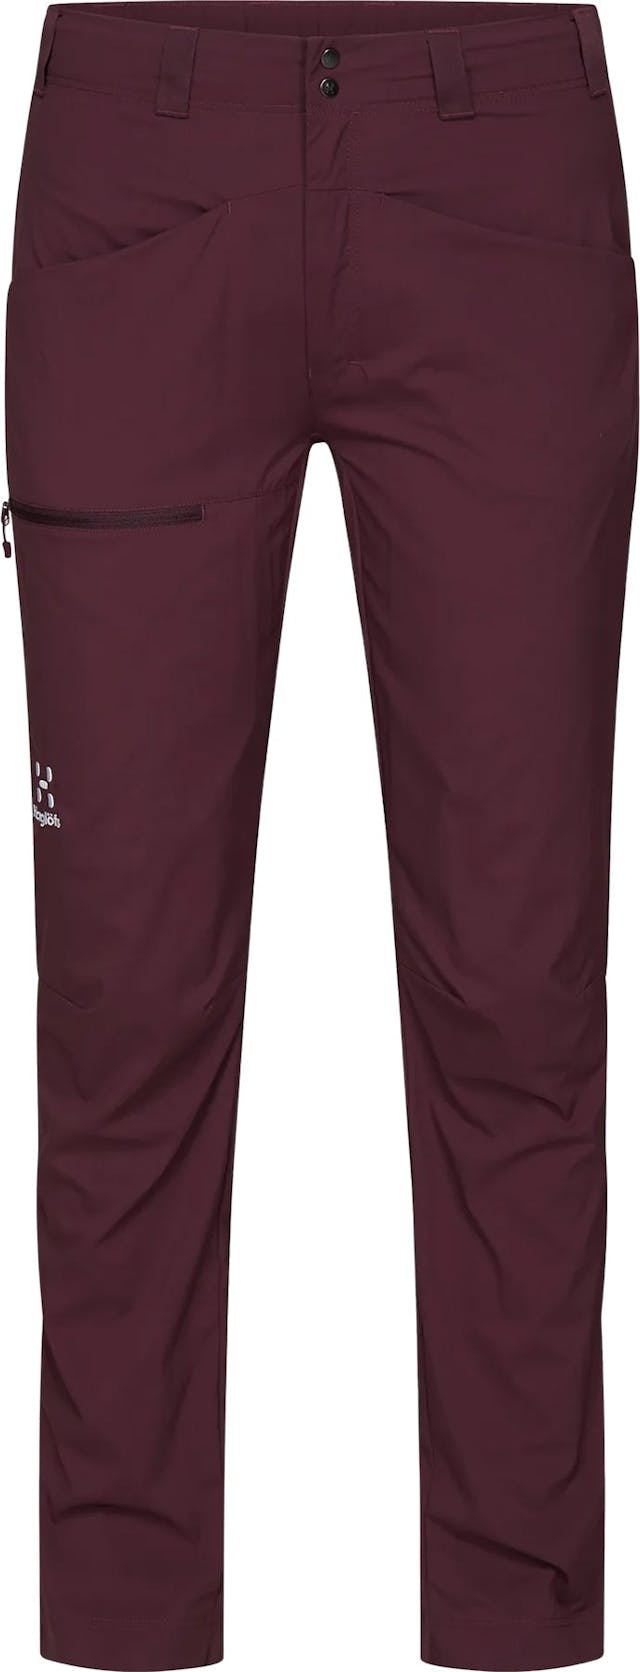 Product image for Lite Standard Pant - Women's